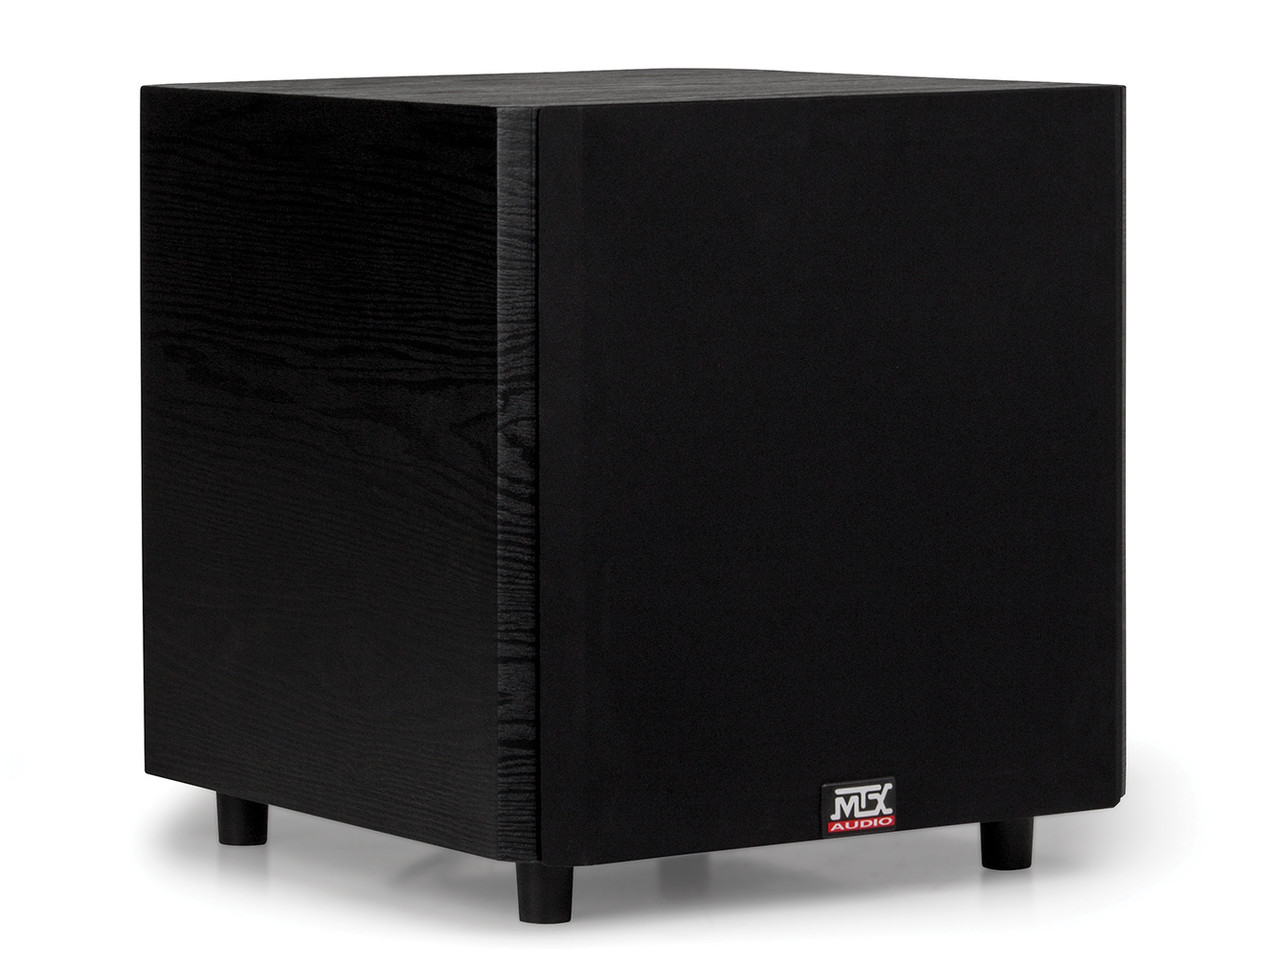 Atlas Sound TSW12 12 inch Powered Home Theater Subwoofer, Single Unit (TSW12)